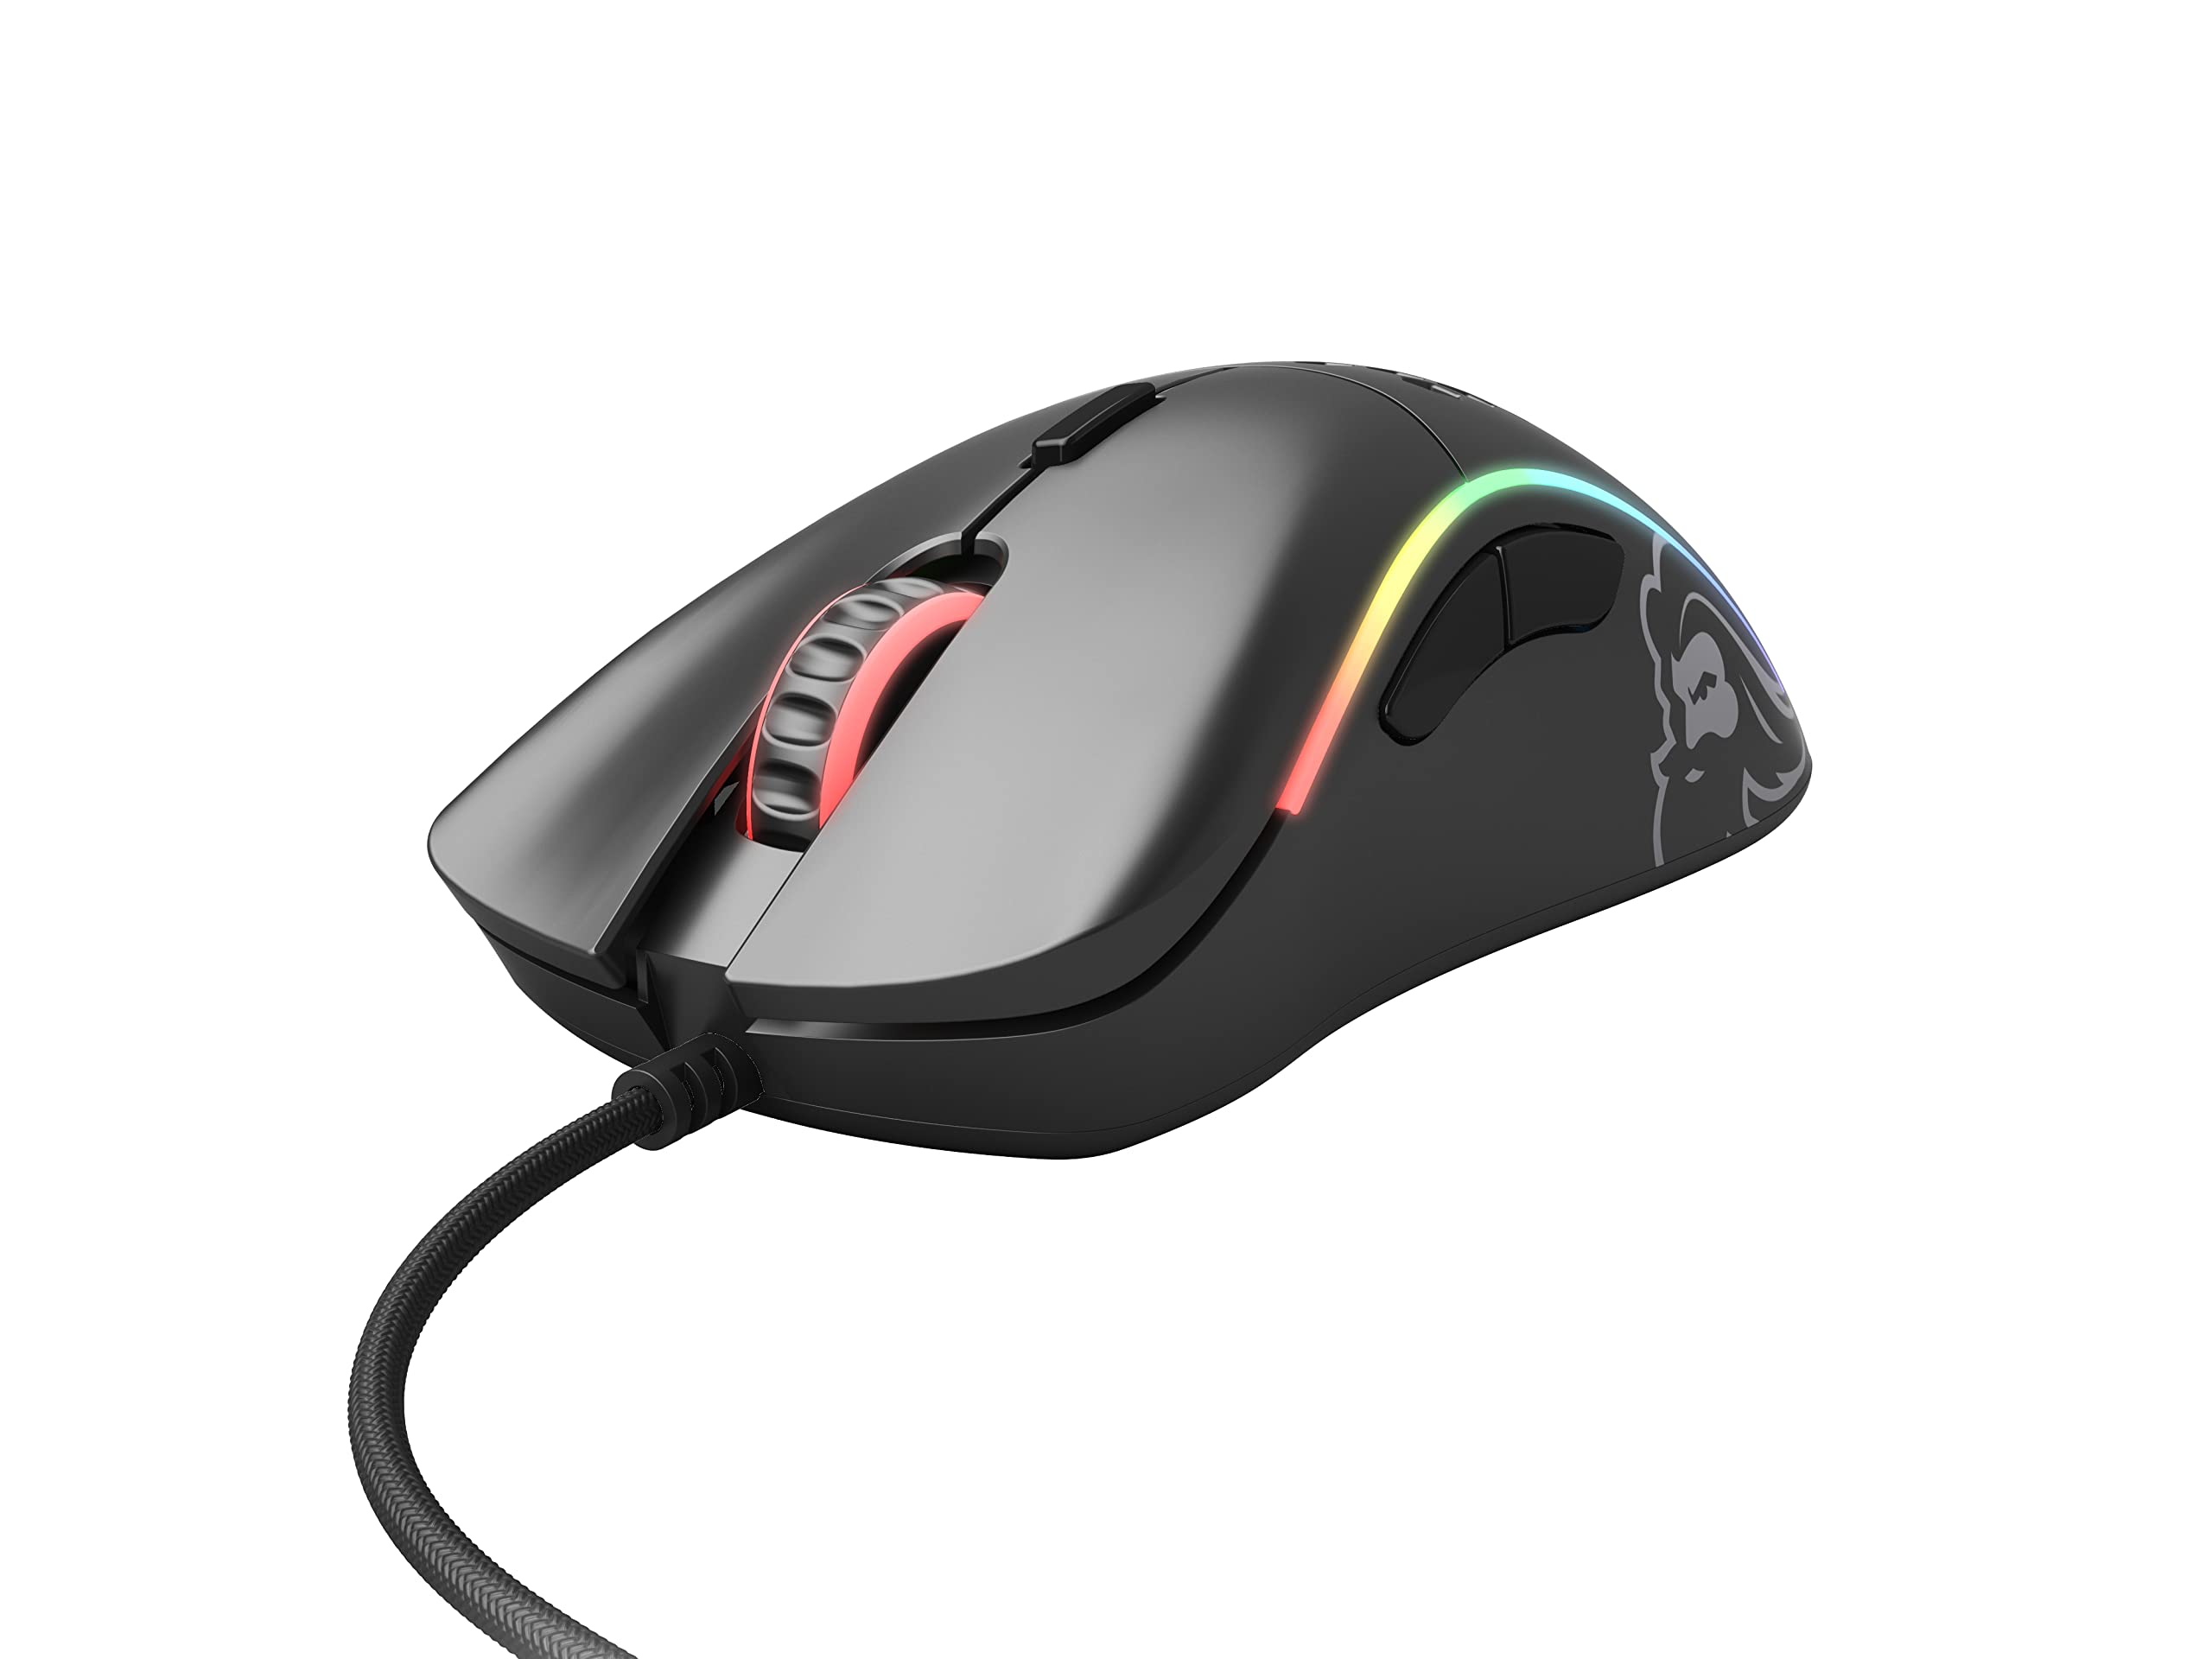 Glorious Gaming Model D Wired Gaming Mouse - 68g Superlight Honeycomb Design, RGB, Ergonomic, Pixart 3360 Sensor, Omron Switches, PTFE Feet, 6 Buttons - Matte Black